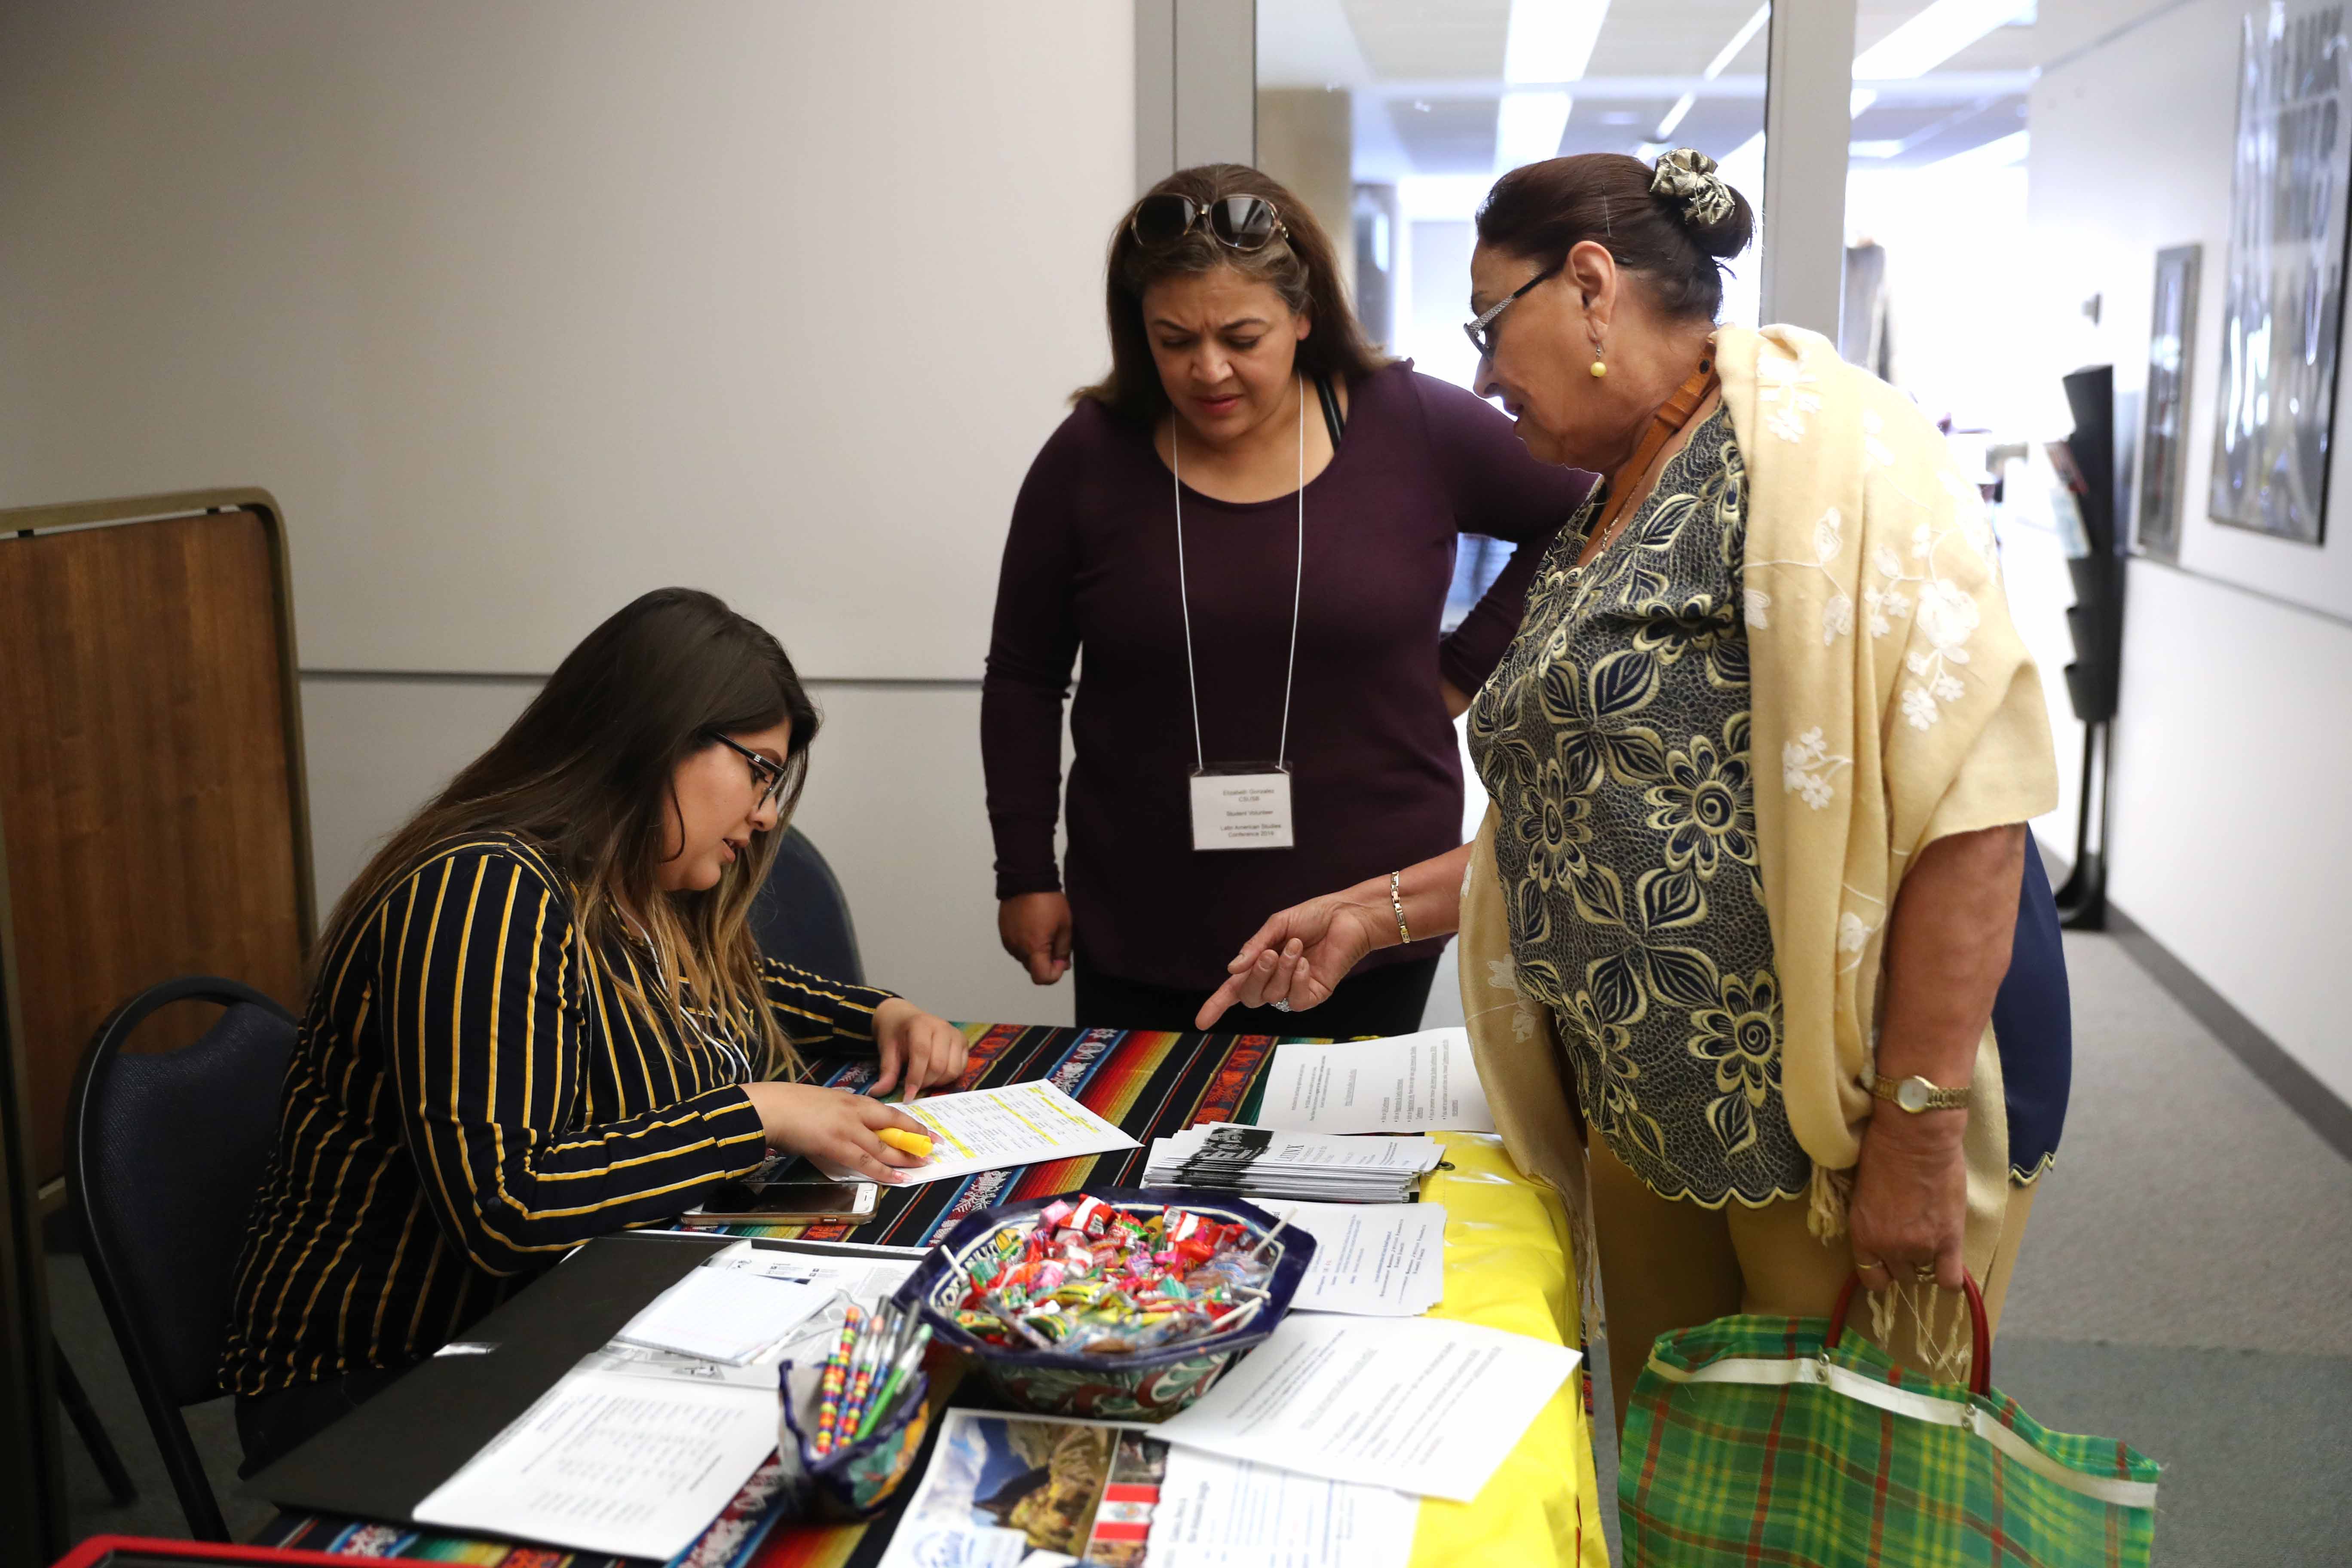 CSUSB Latin American Studies Conference two-day event, held April 25- 26, took place in the John M. Pfau Library.